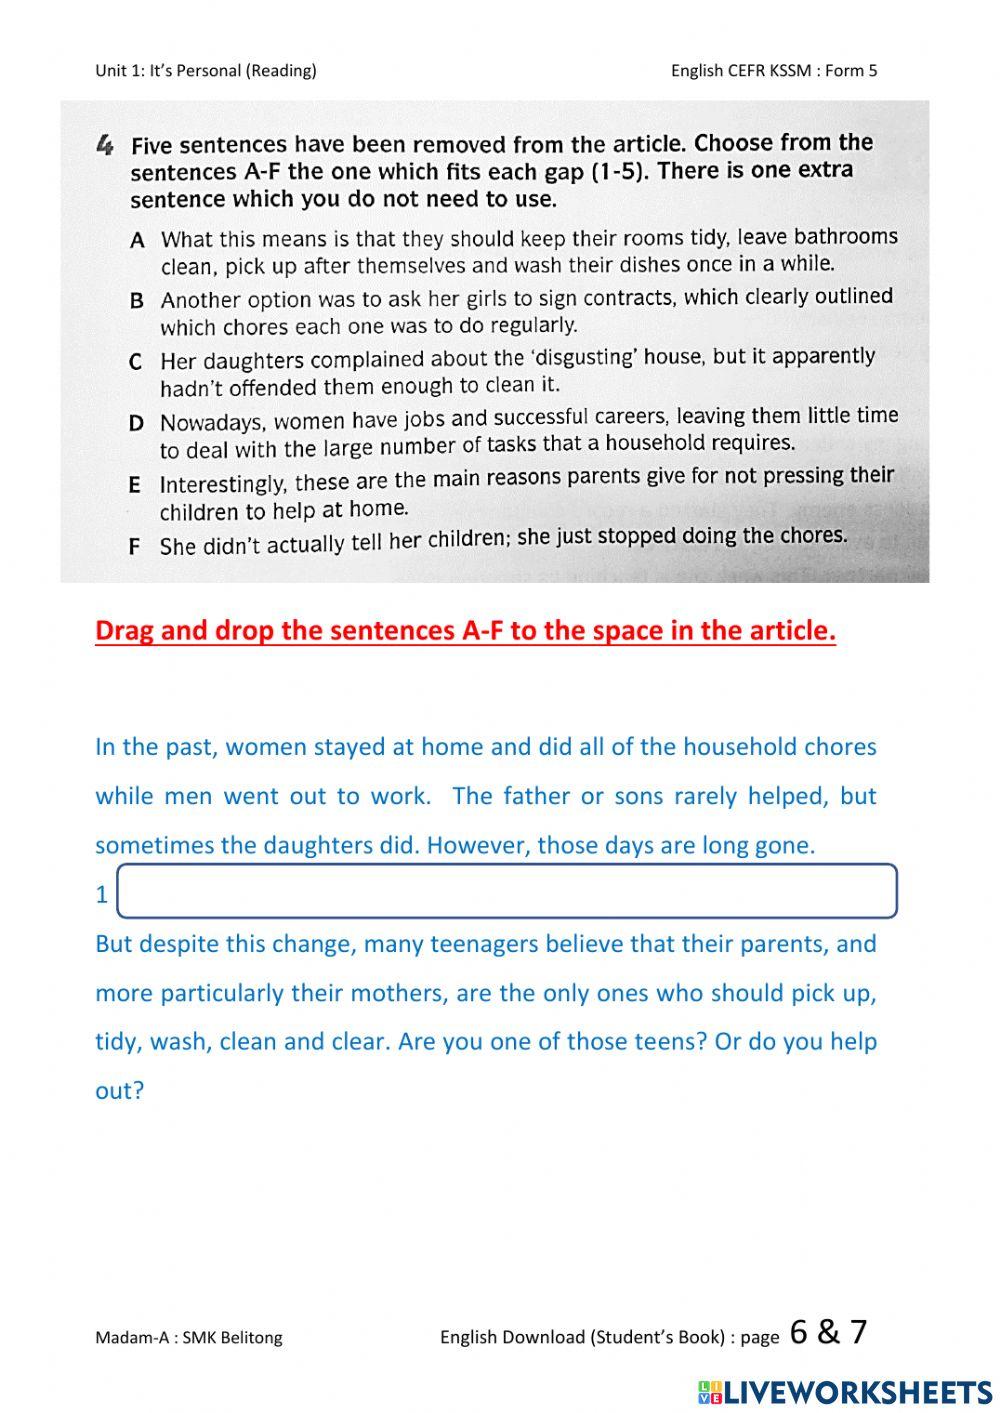 English CEFR Form 5 Unit 1: Page 6 & 7